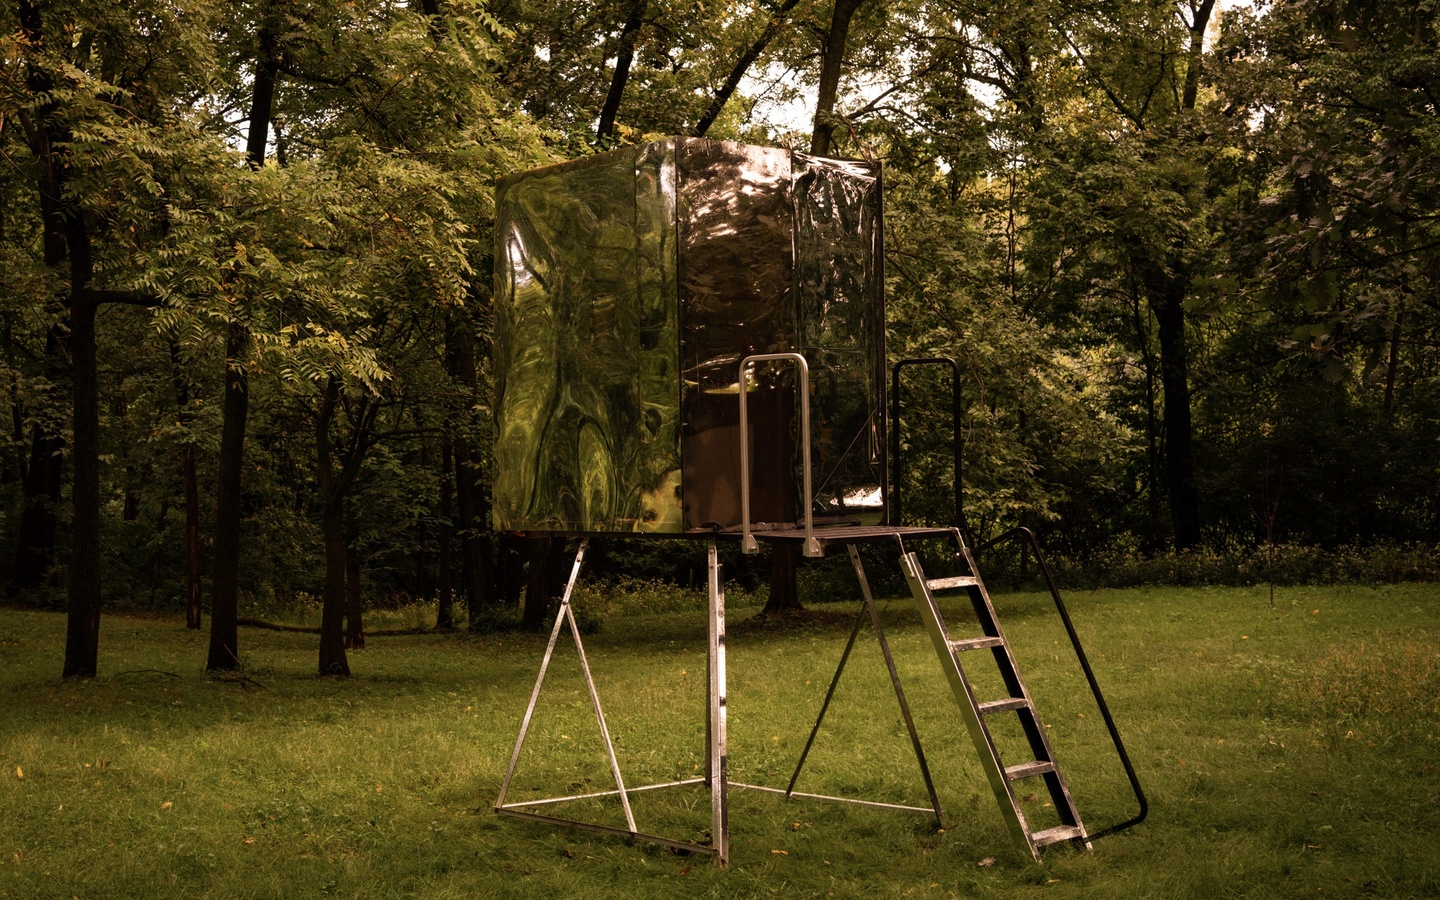 Sculptural installation set in a grassy, wooded area, featuring a ladder leading to a square base, with a cube of reflective panels.